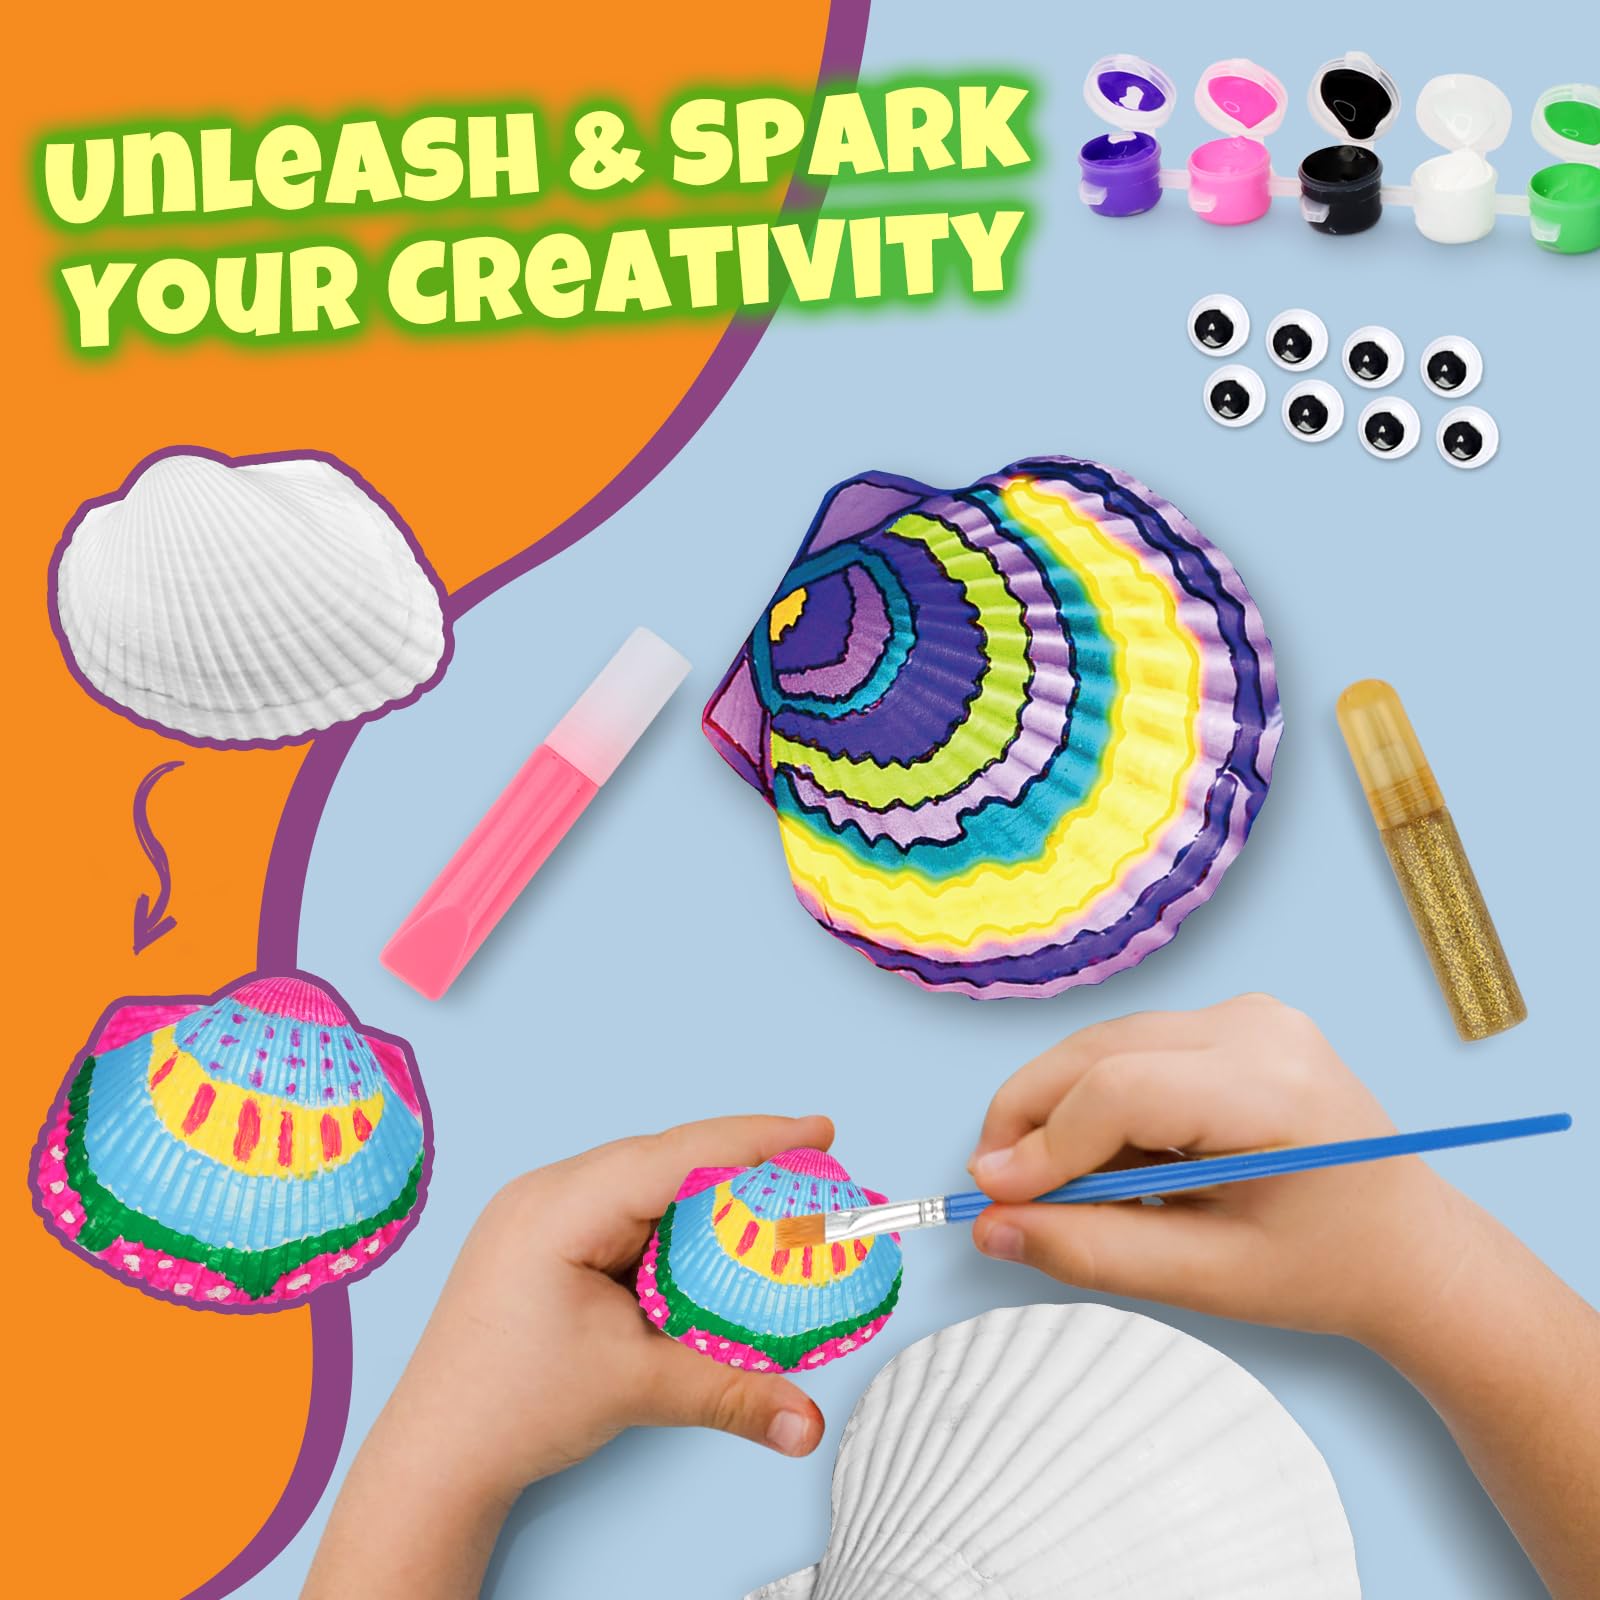 Nicmore Kids Sea Shell Art & Crafts: Glow in The Darkness Painting Kits  Crafts for Age 4[]